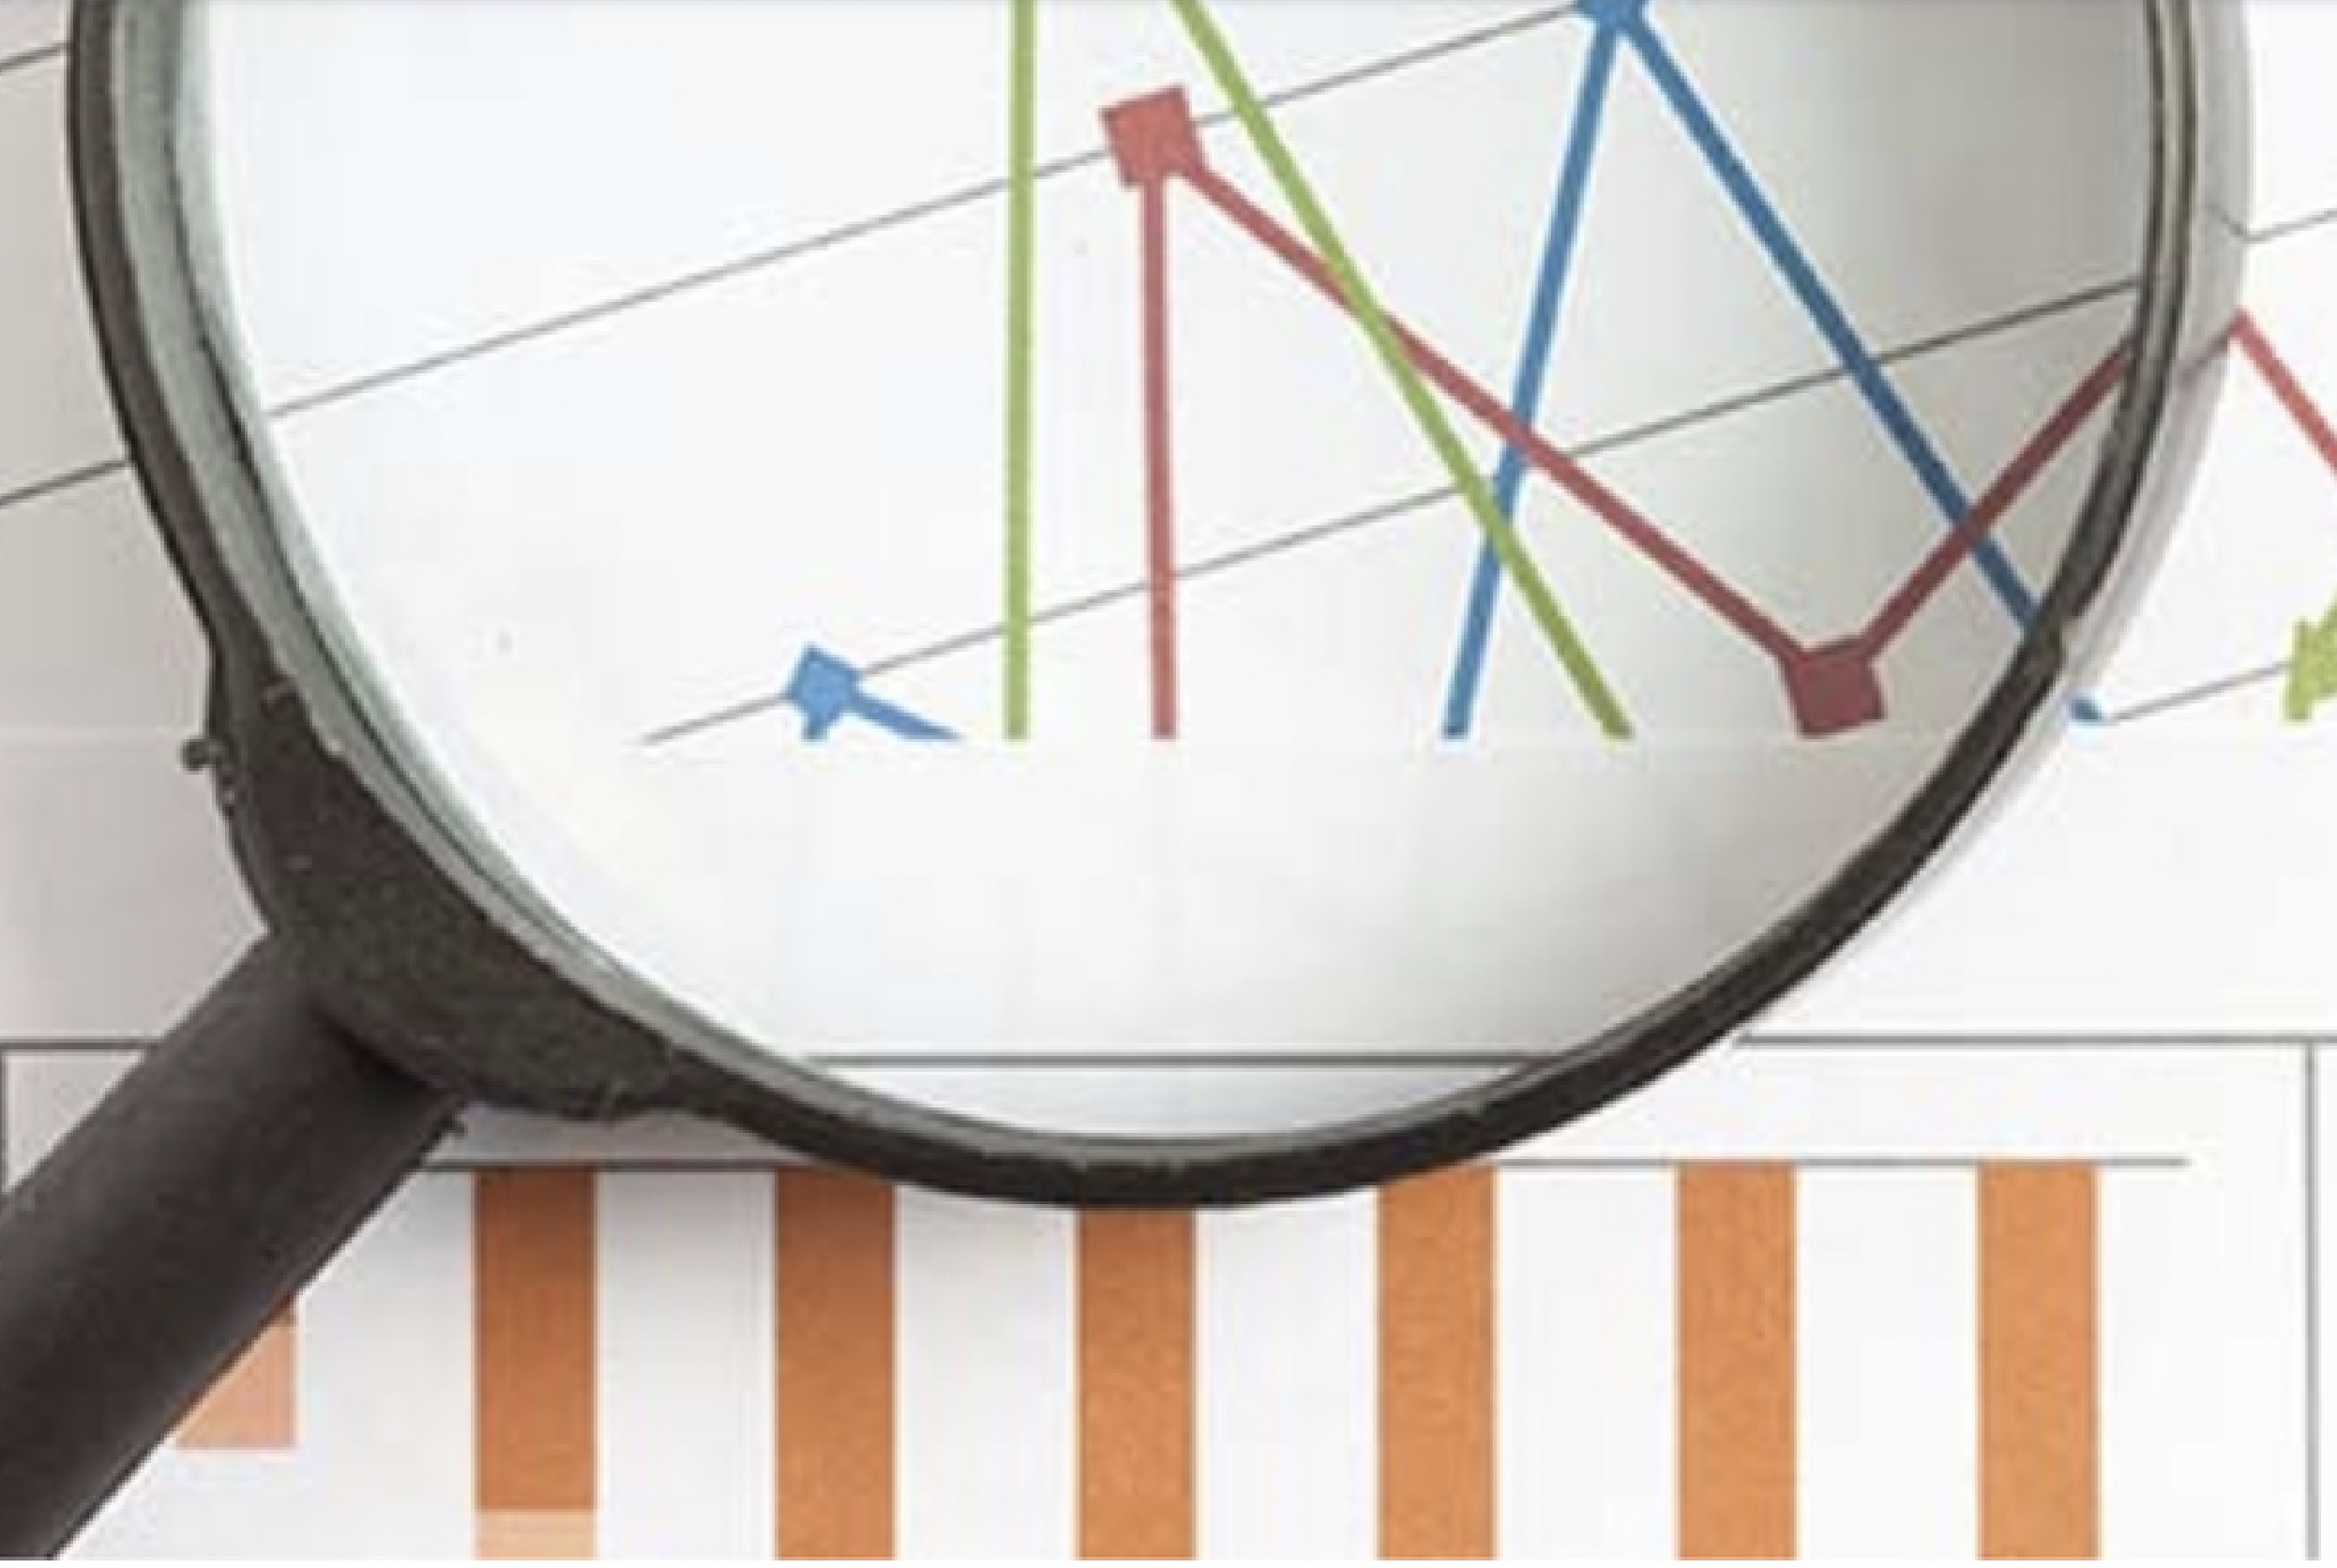 magnifying glass over financial charts